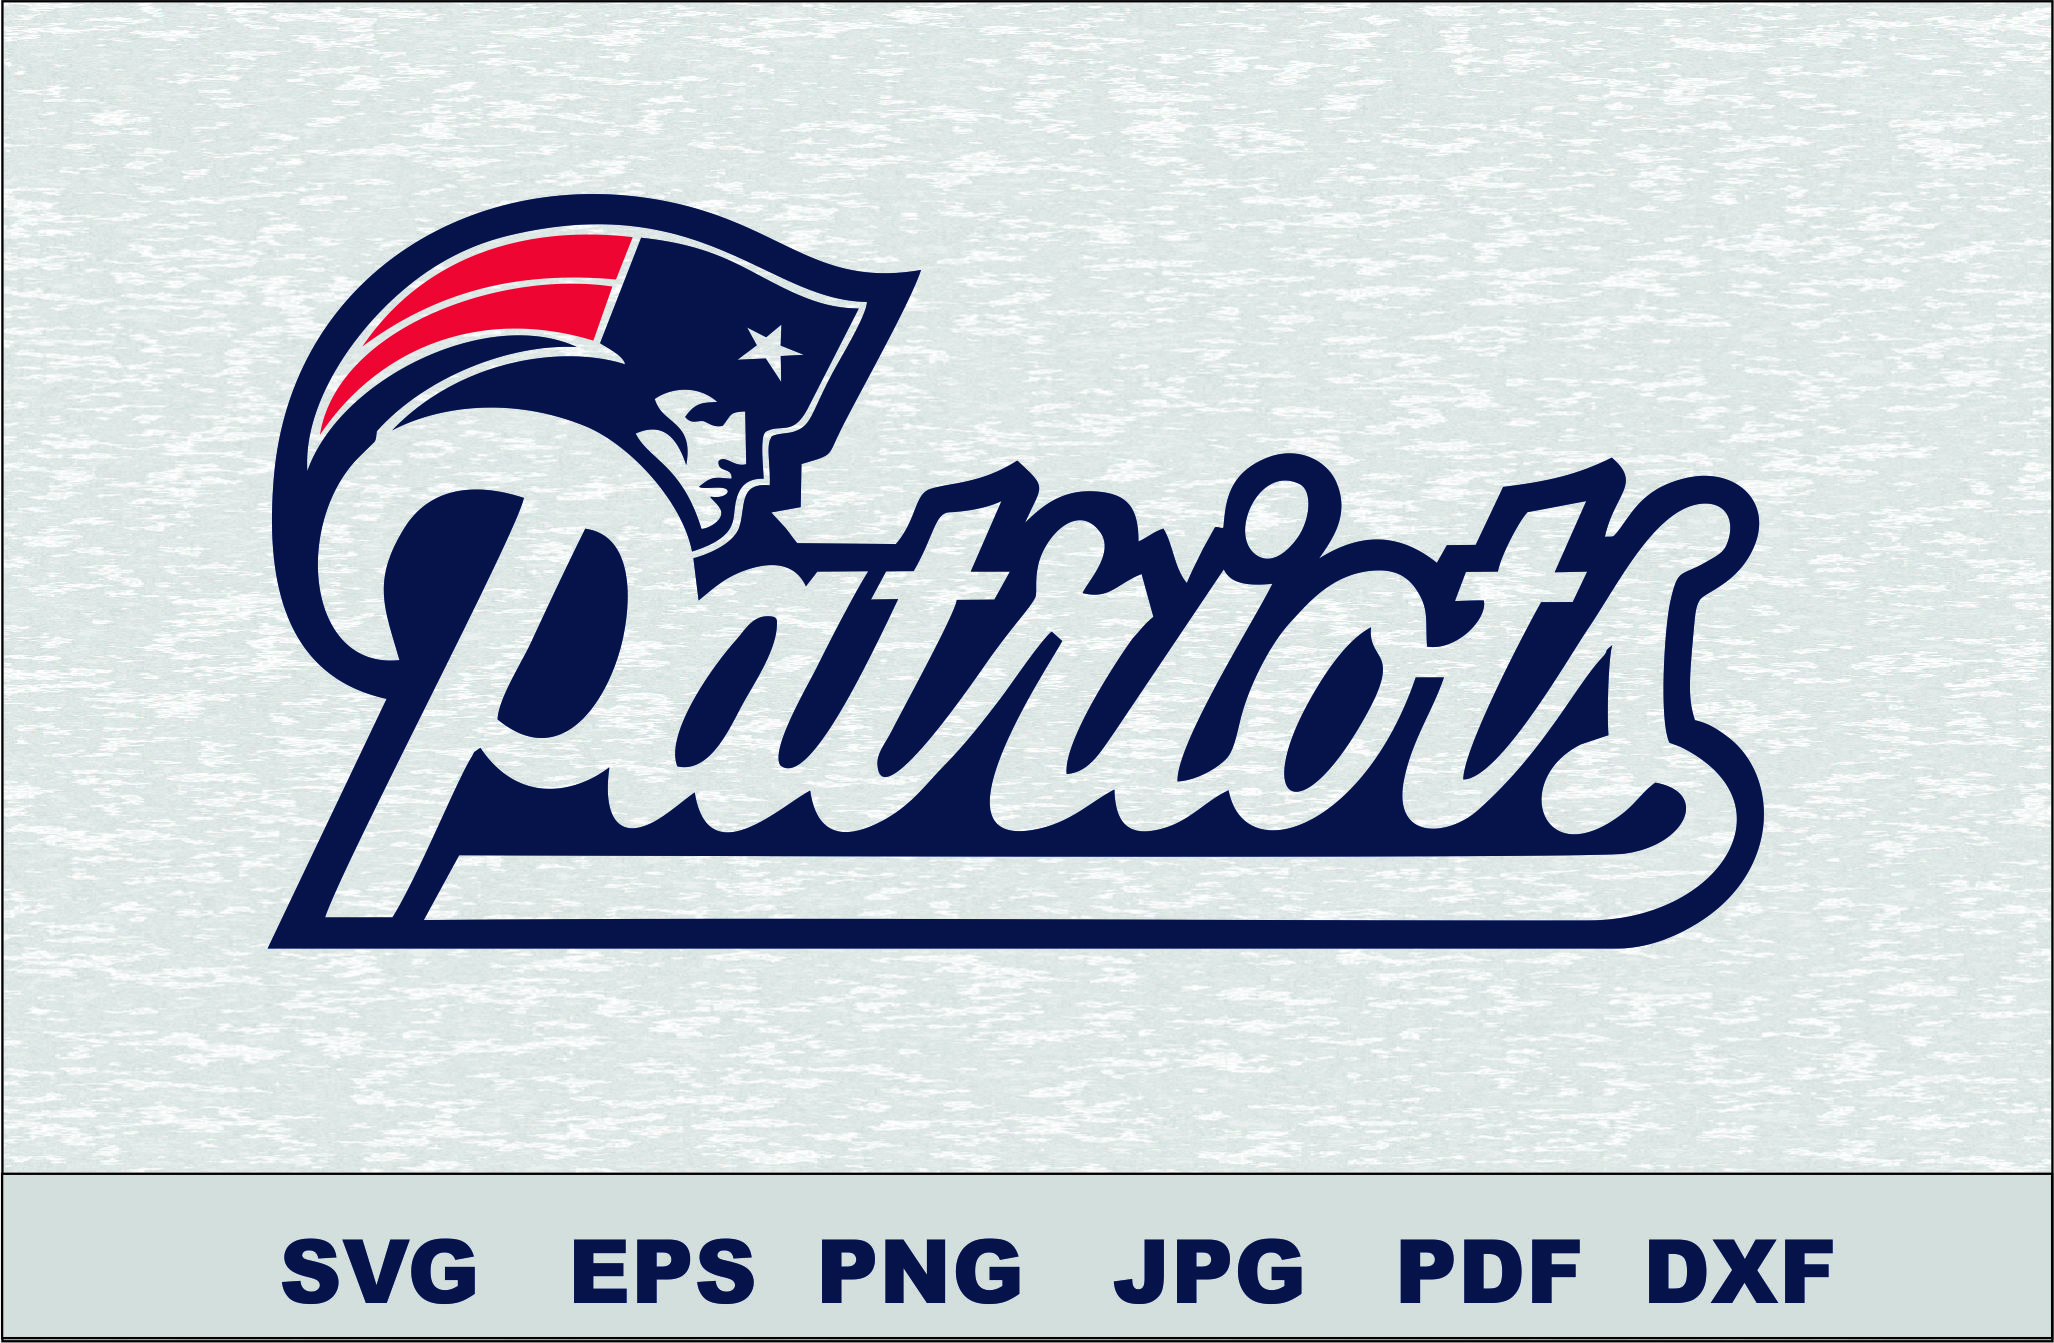 Download New England Patriots Svg Dxf Logo Silhouette Studio Transfer Iron On Cut File Cameo Cricut Iron On Decal Vinyl Decal Layered Vector